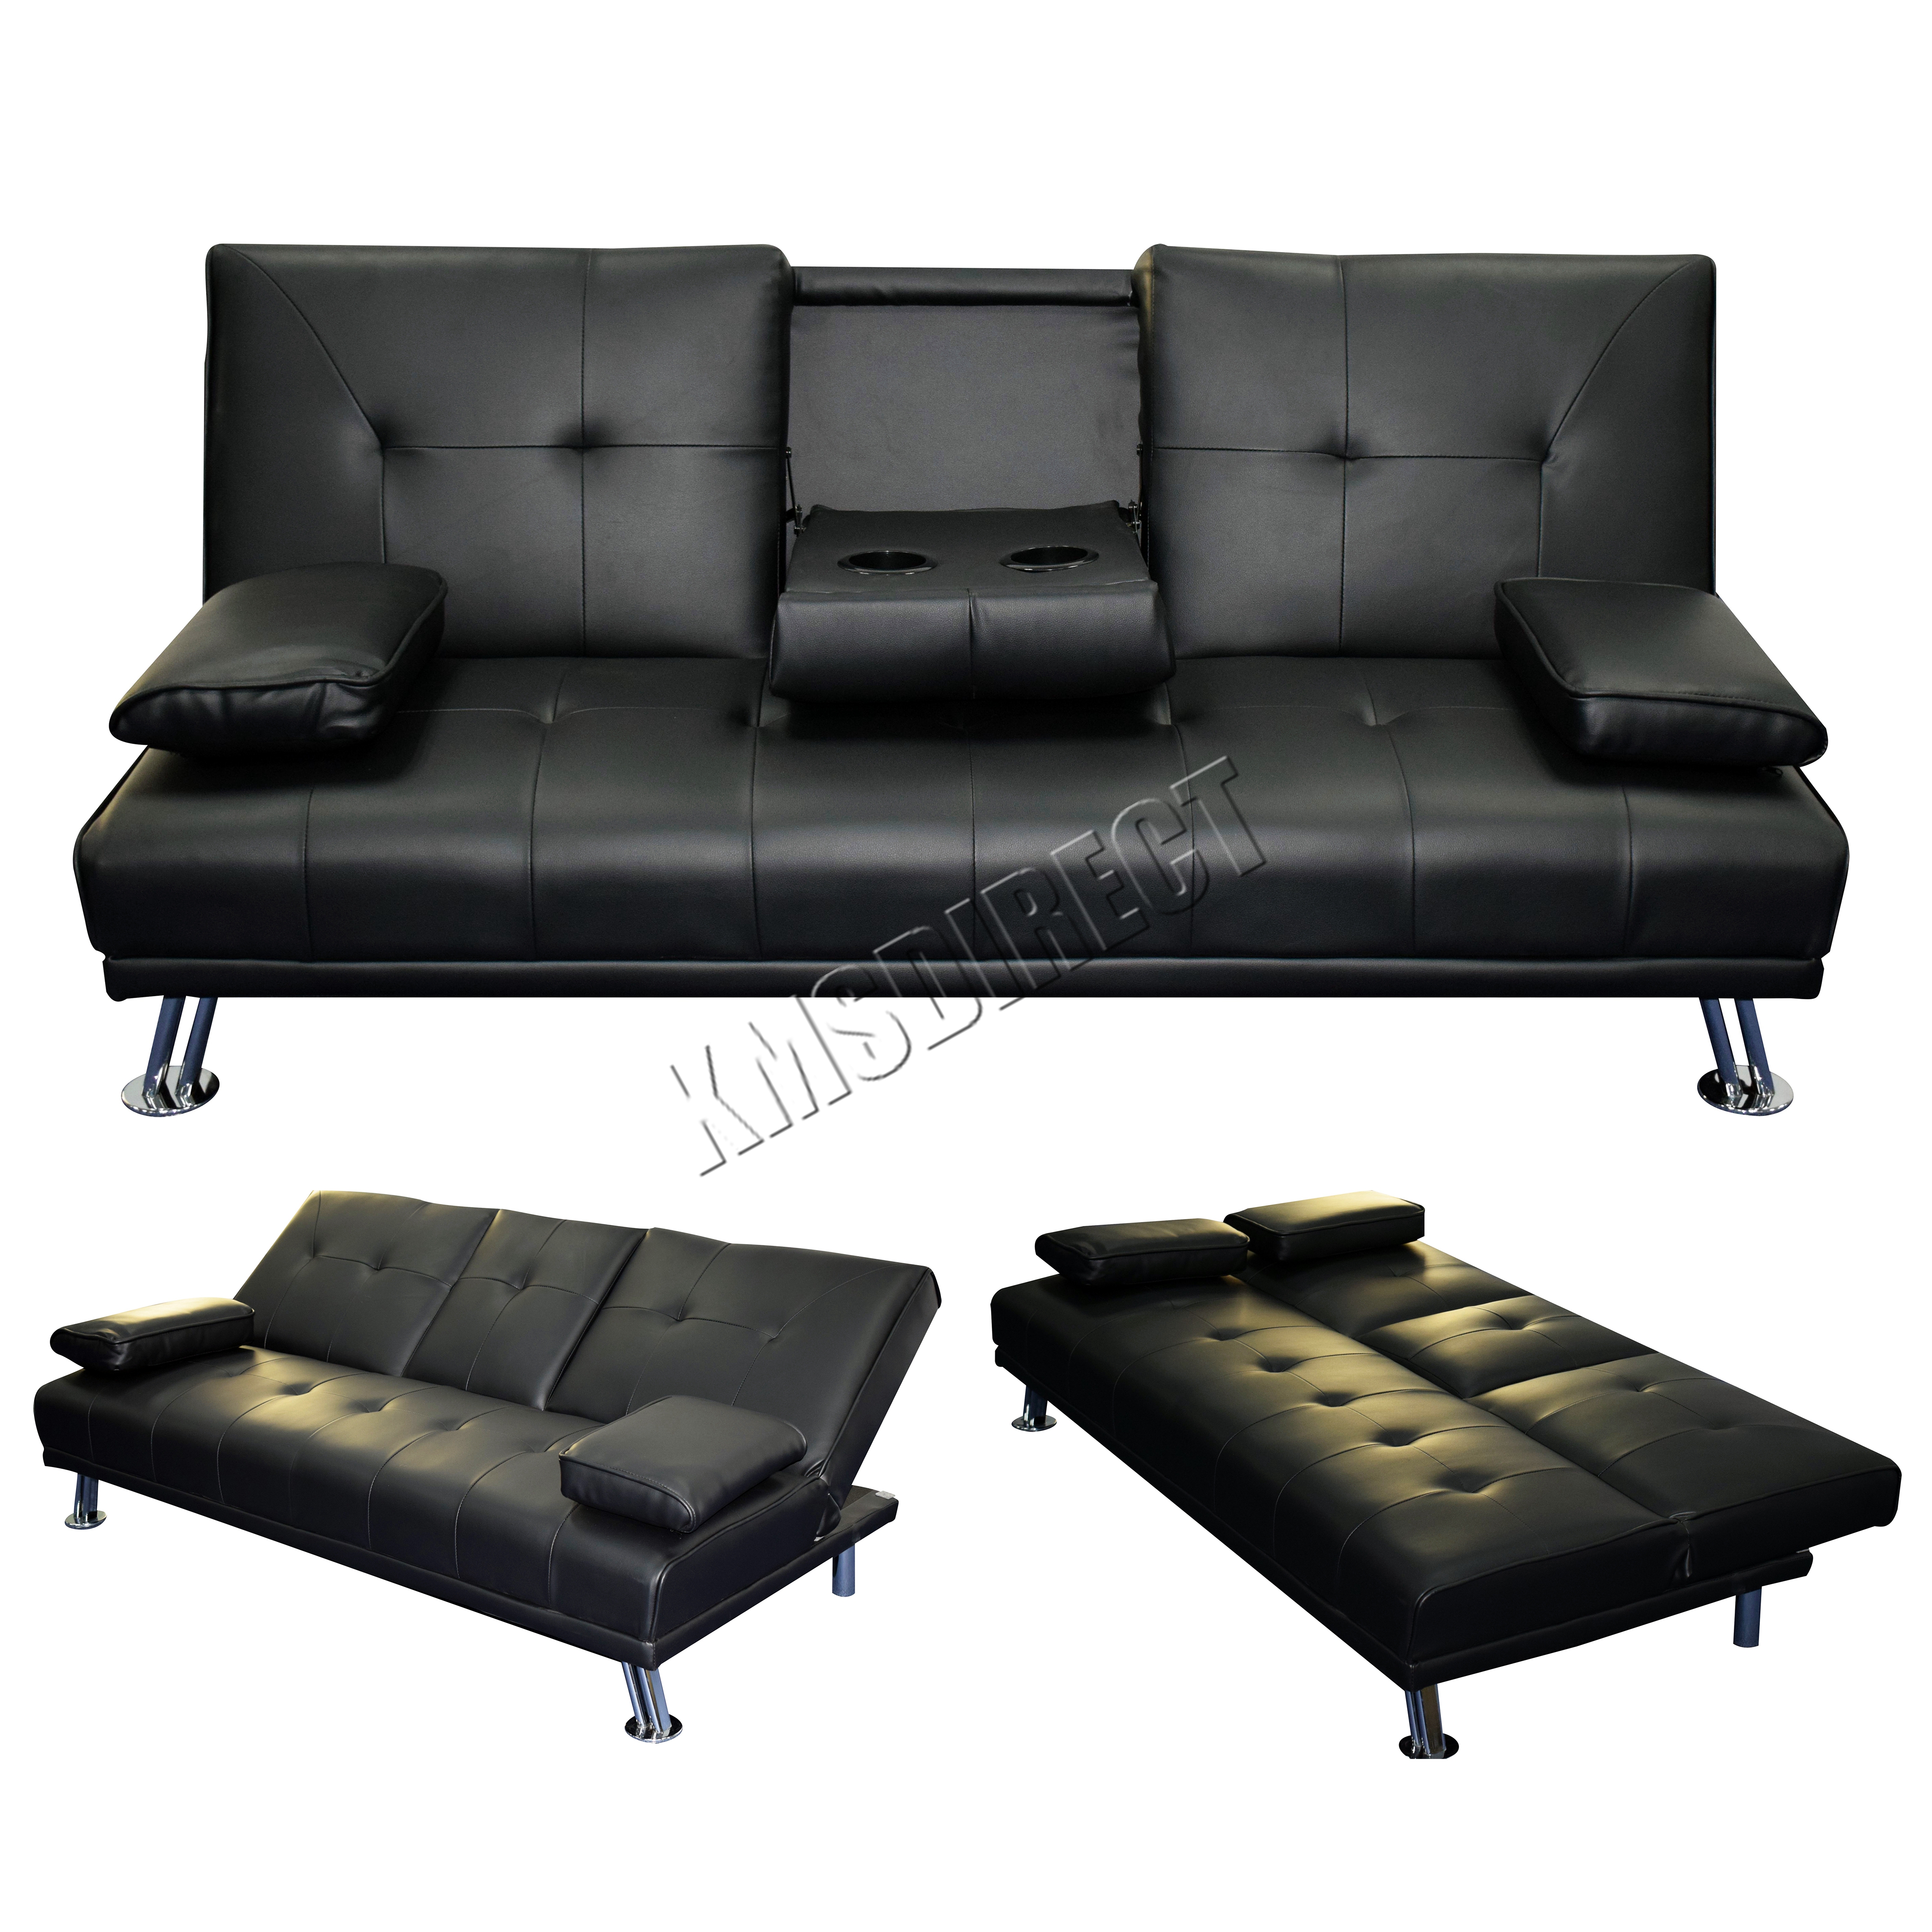 leather sectional sofa bed recliner photo - 6